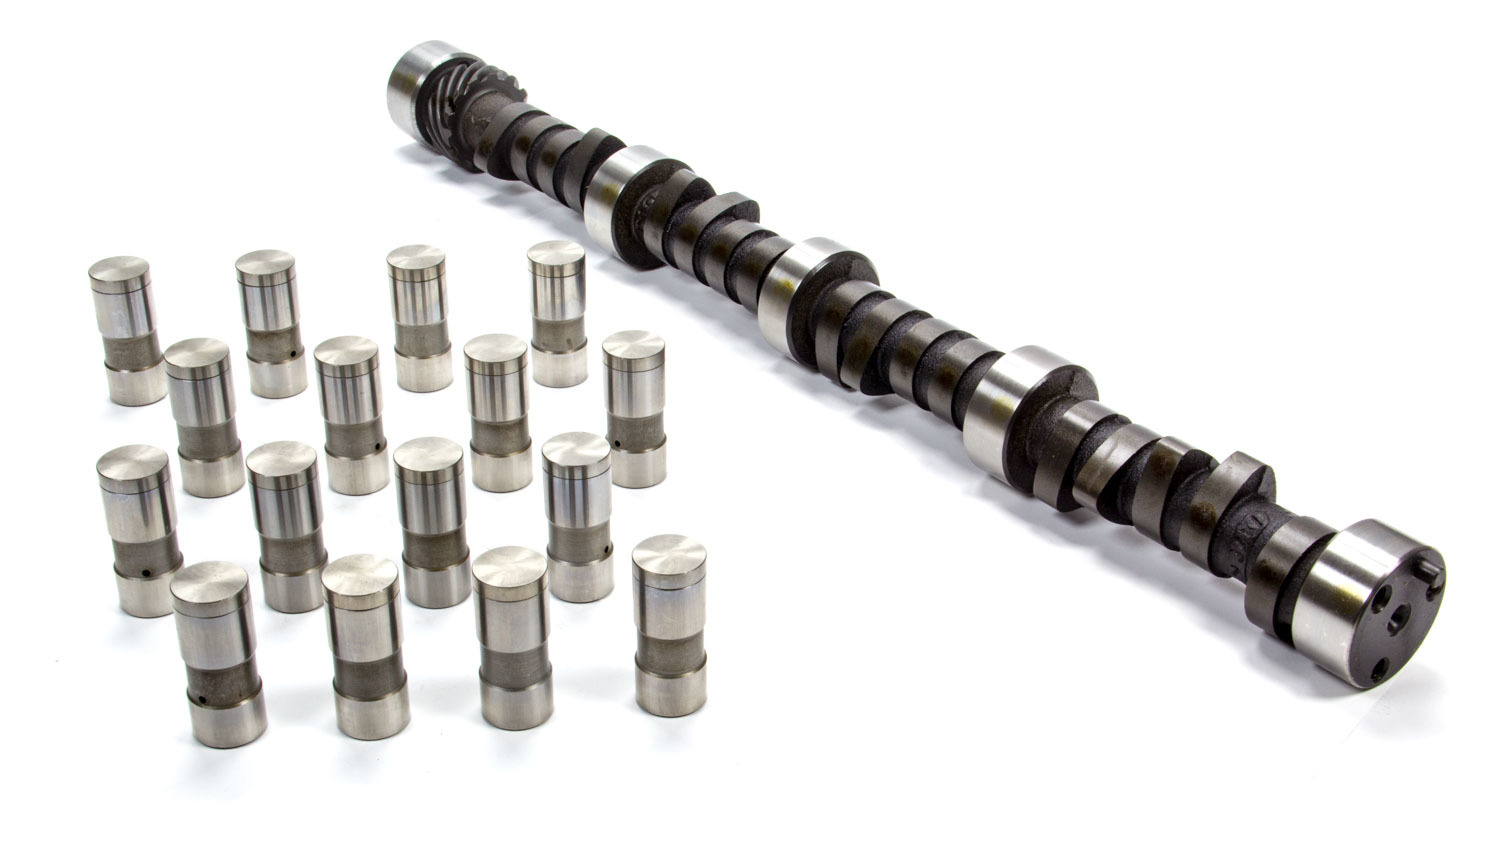 Elgin CL-1784PK Camshaft / Lifters, Street Performance, Hydraulic Flat Tappet, Lift 0.480 / 0.480 in, Duration 284 / 284, 112 LSA, 2000 / 4800 RPM, Small Block Chevy, Kit